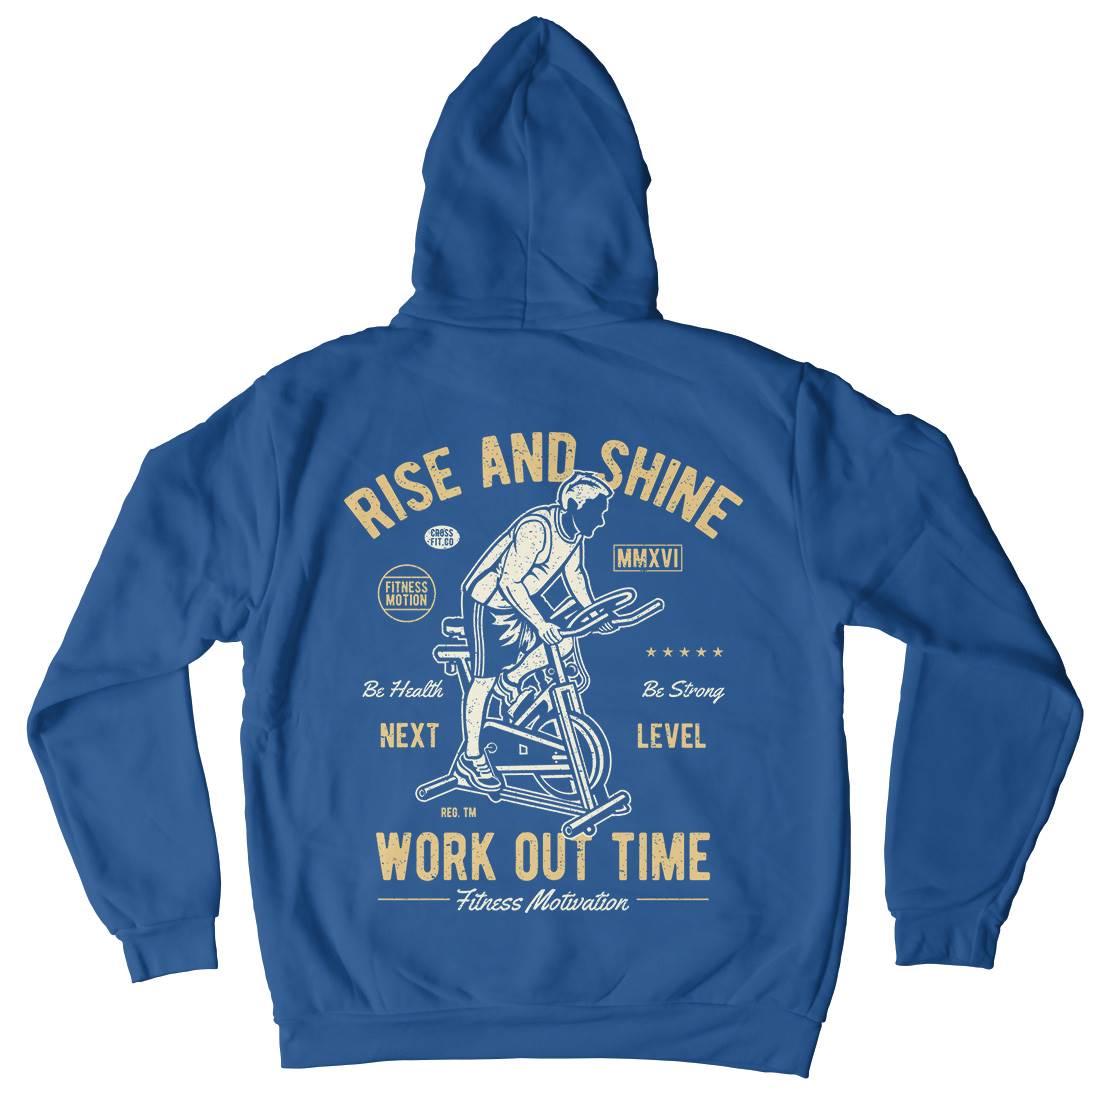 Work Out Time Kids Crew Neck Hoodie Gym A199